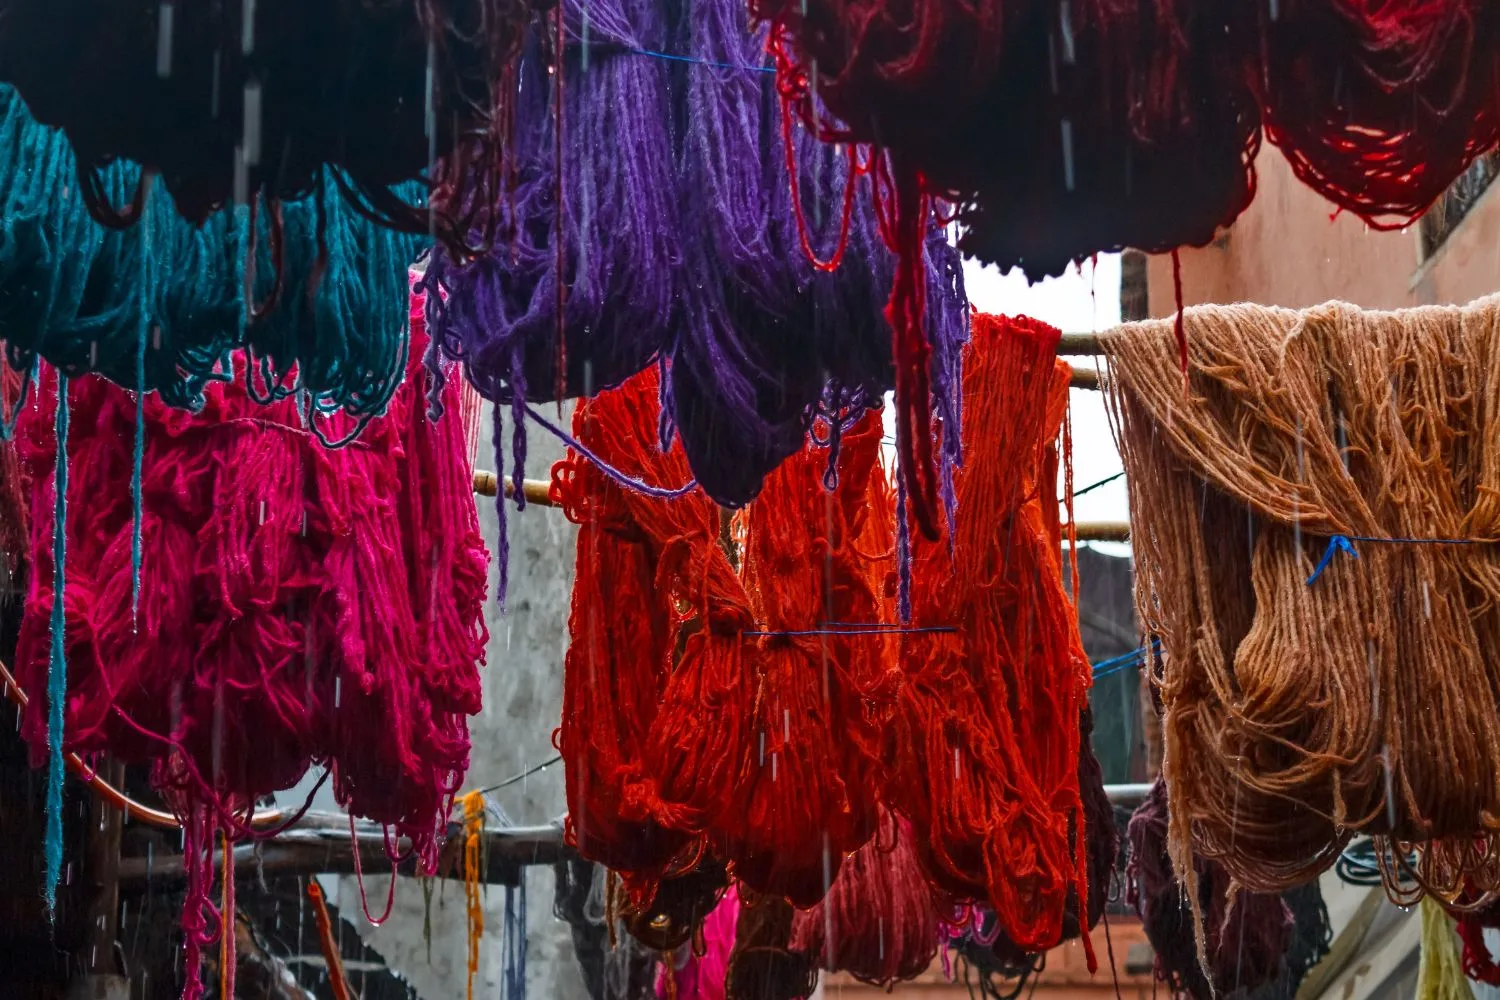 Colored dyed yarn is dried on the streets of Morocco